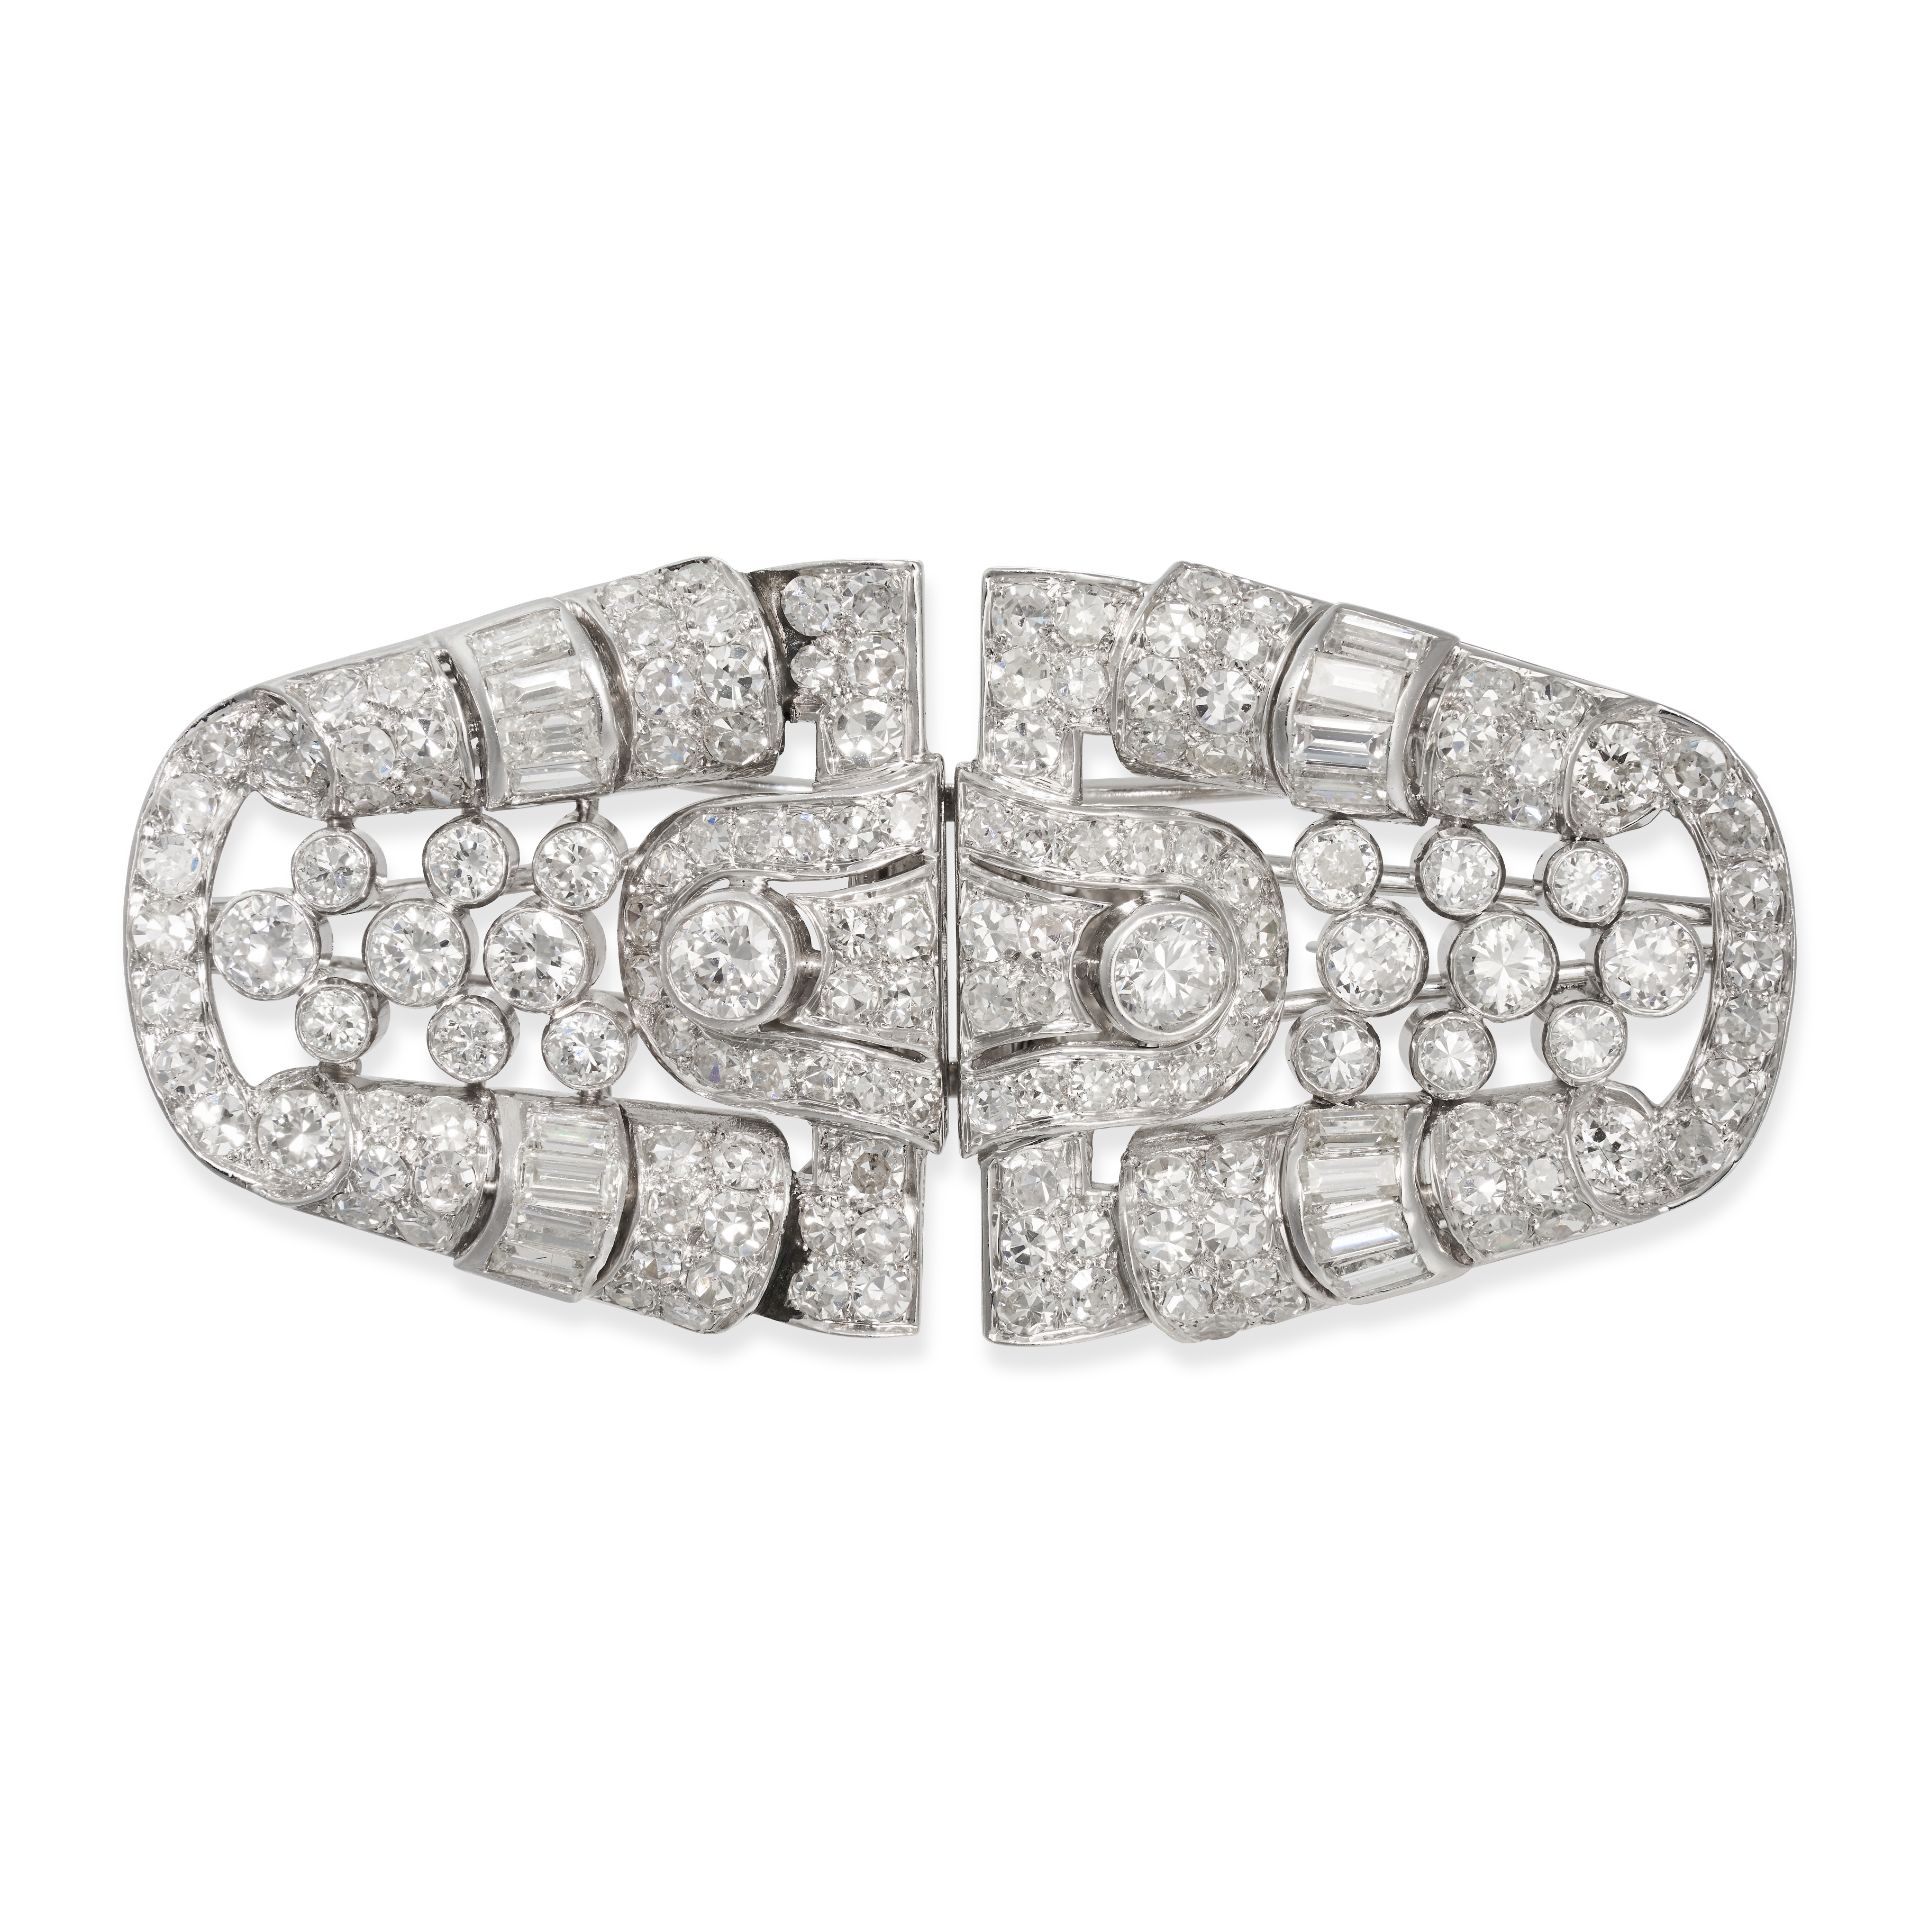 A DIAMOND DOUBLE CLIP BROOCH in white gold and platinum, the openwork brooch set throughout with ...